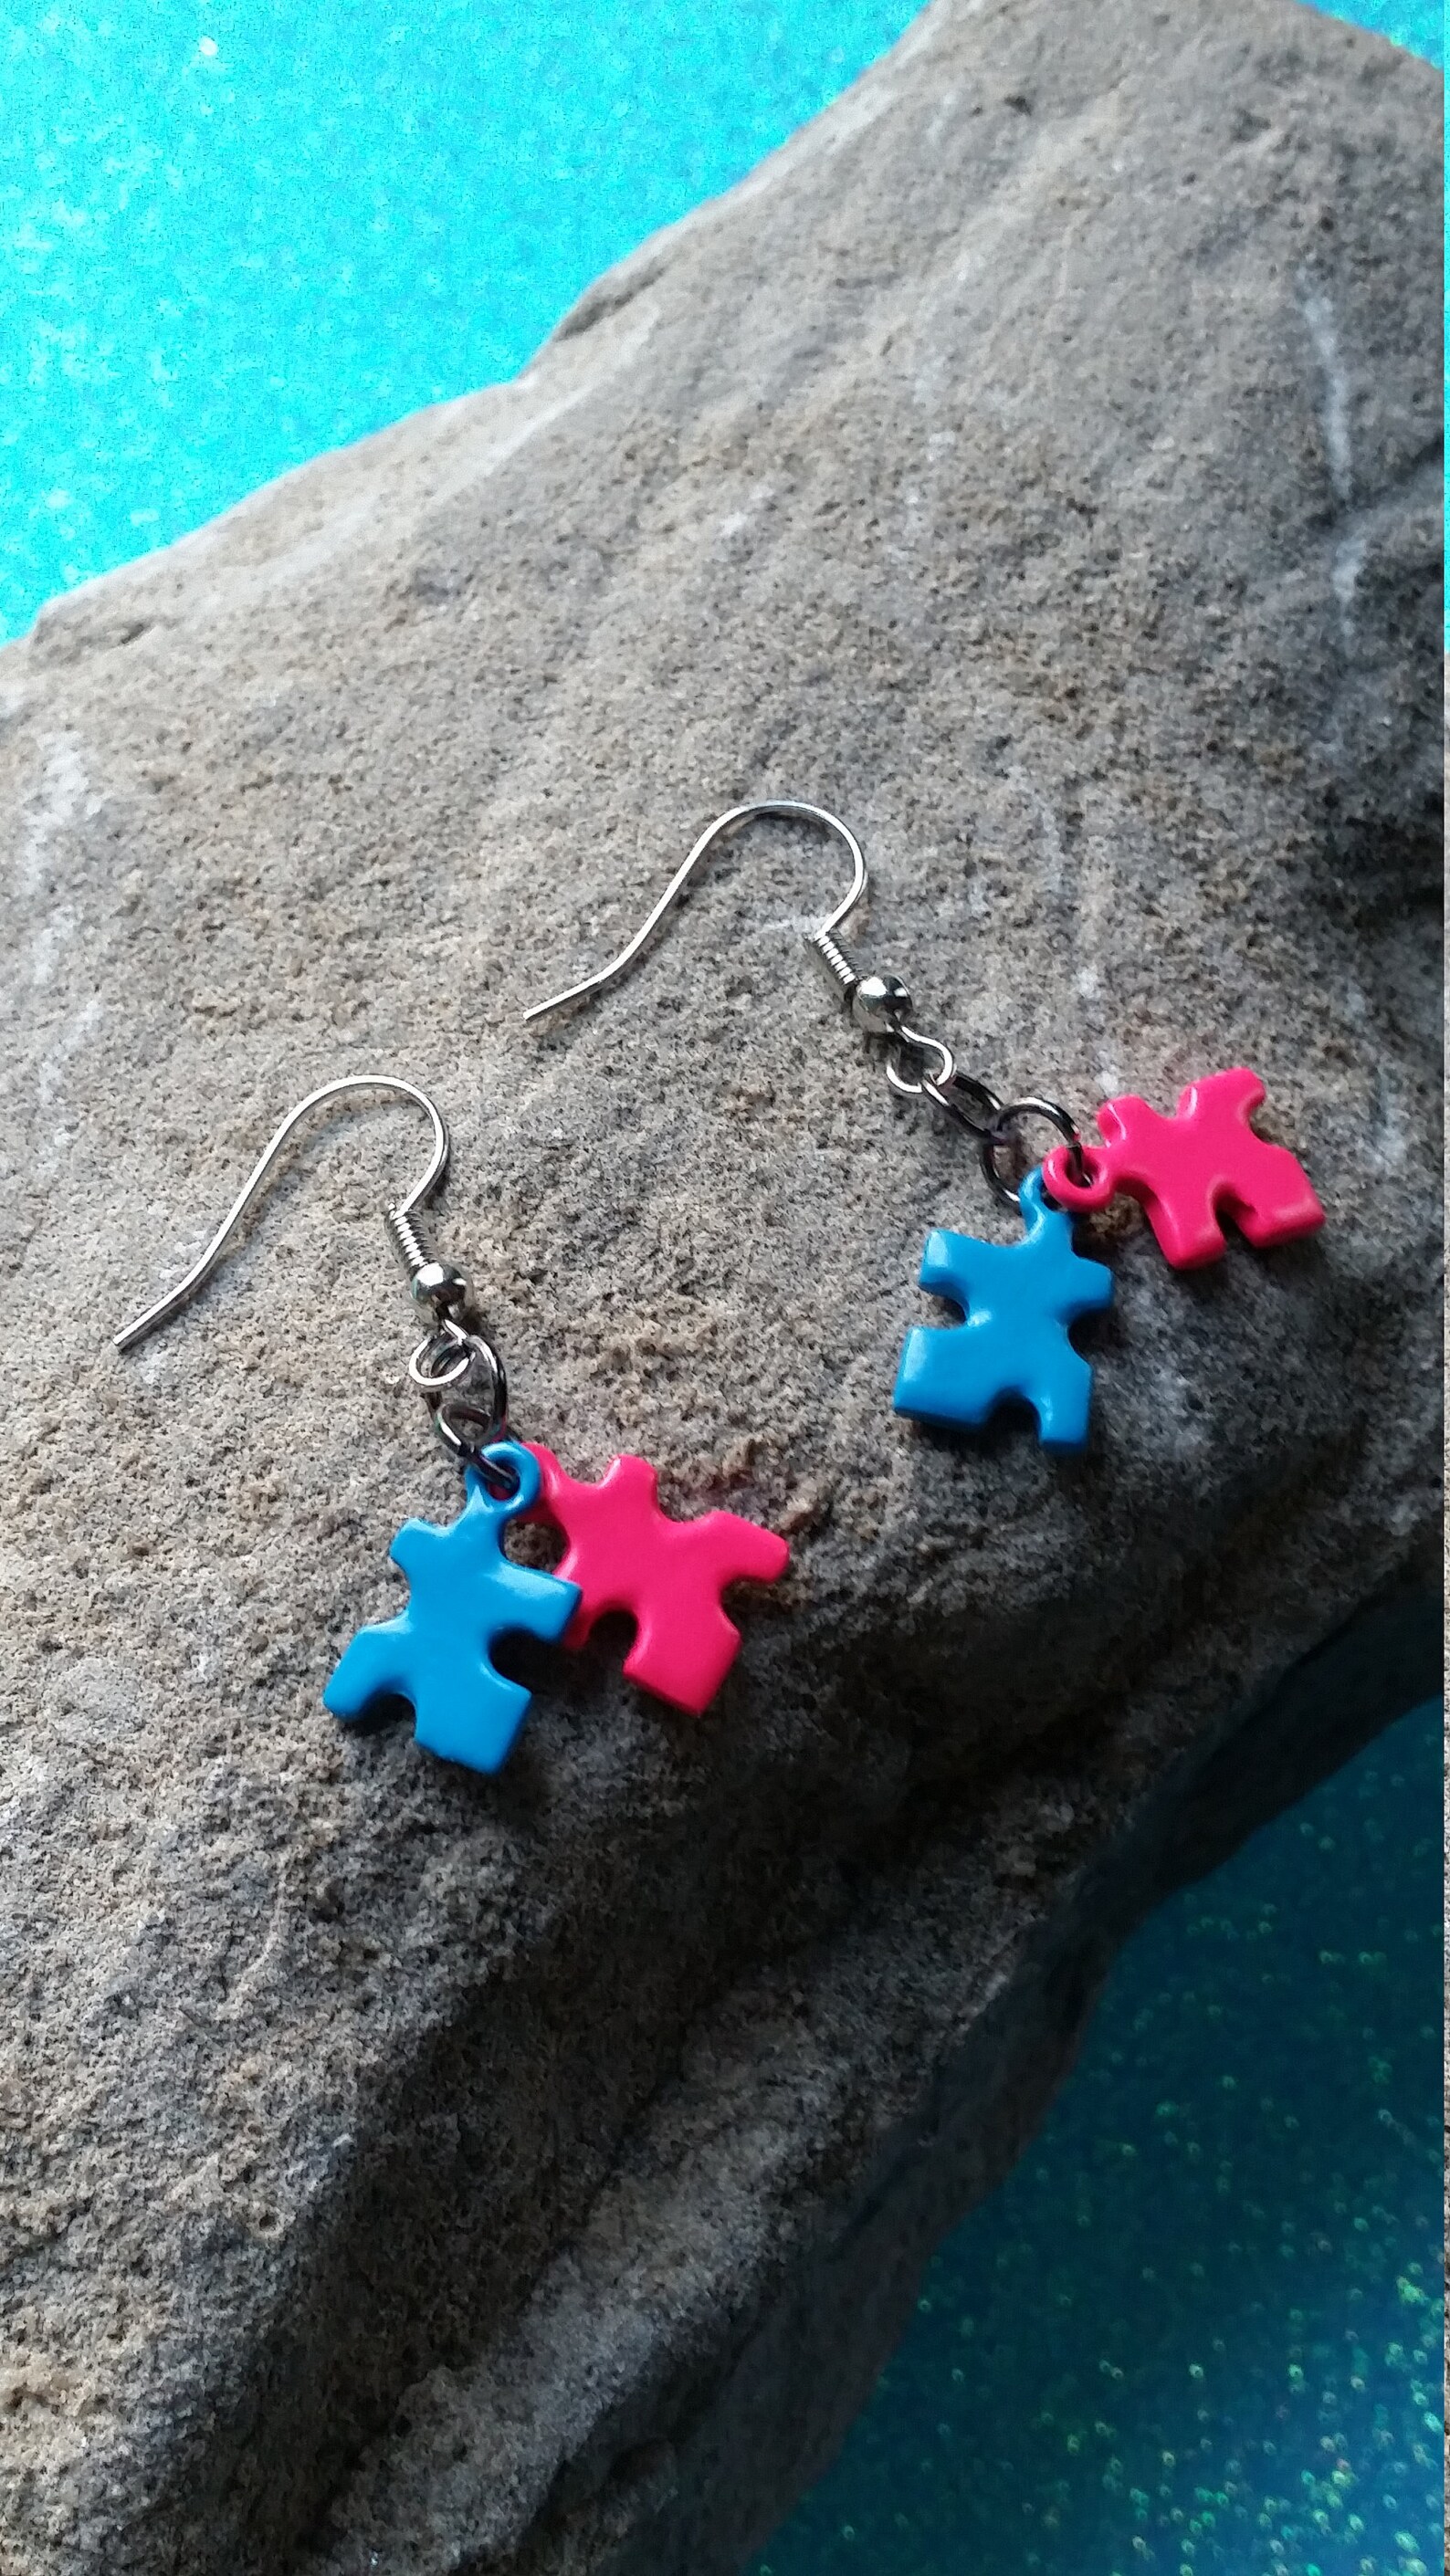 Puzzle Piece Earrings Tiny Puzzle Earrings Blue and Pink | Etsy